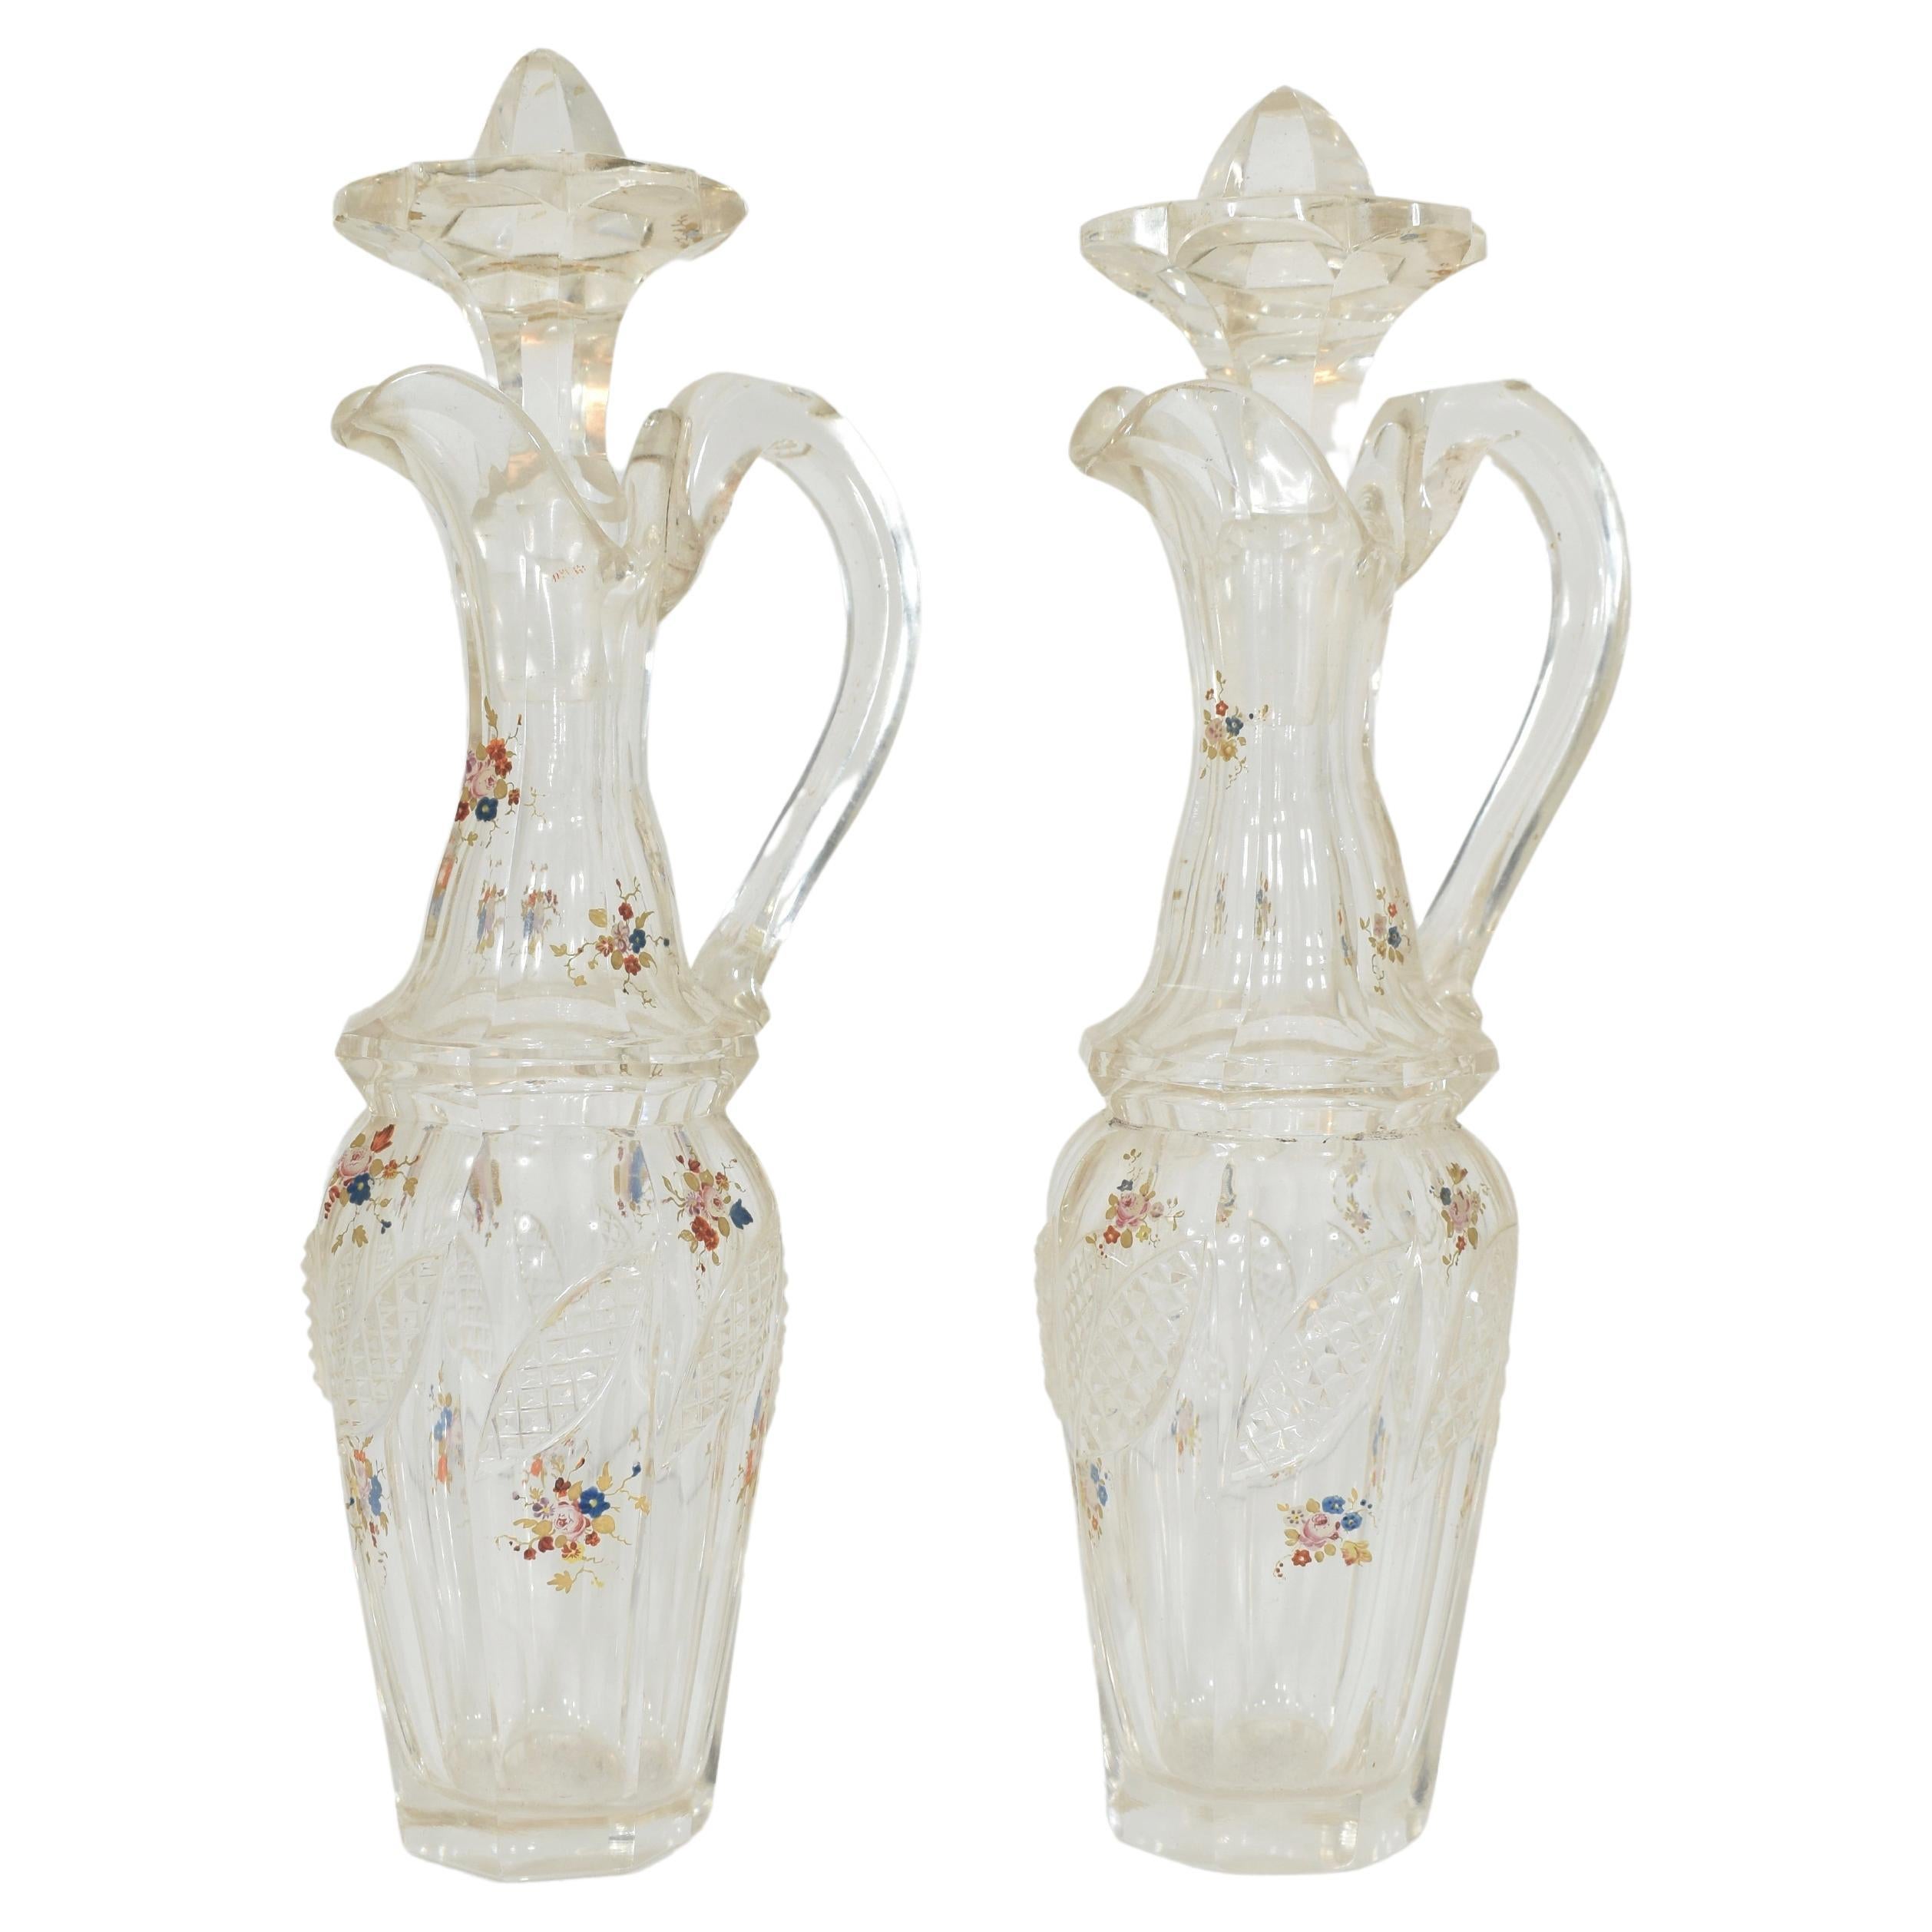 Antique Cut Glass and Metal Oil and Veniger Cruet Set, 19th Century In Good Condition For Sale In Rostock, MV